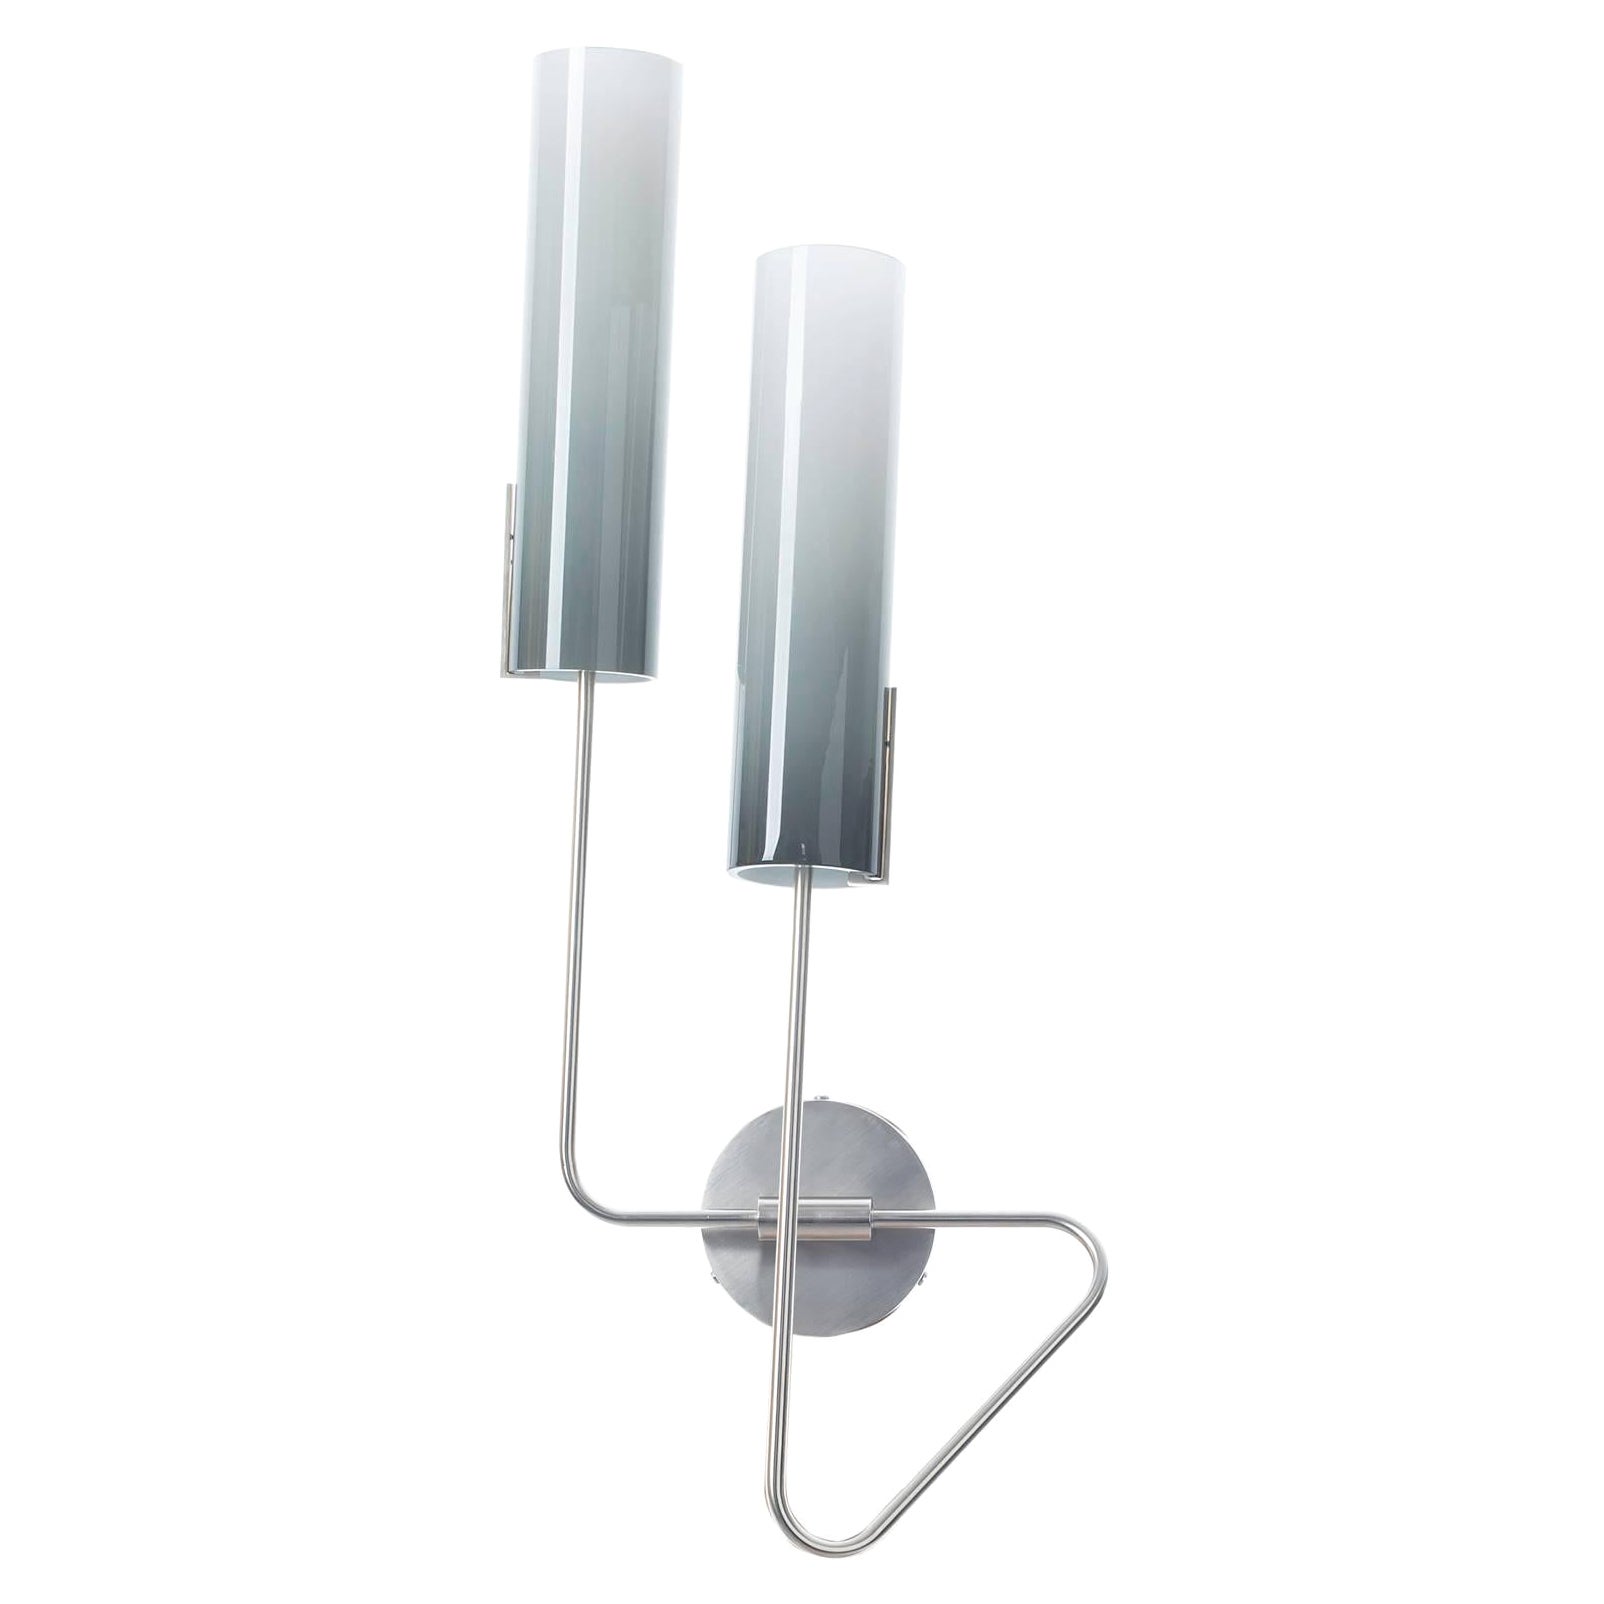 Continuum 01 Sconce: Satin Nickel/Charcoal Ombre Shades by Avram Rusu Studio For Sale